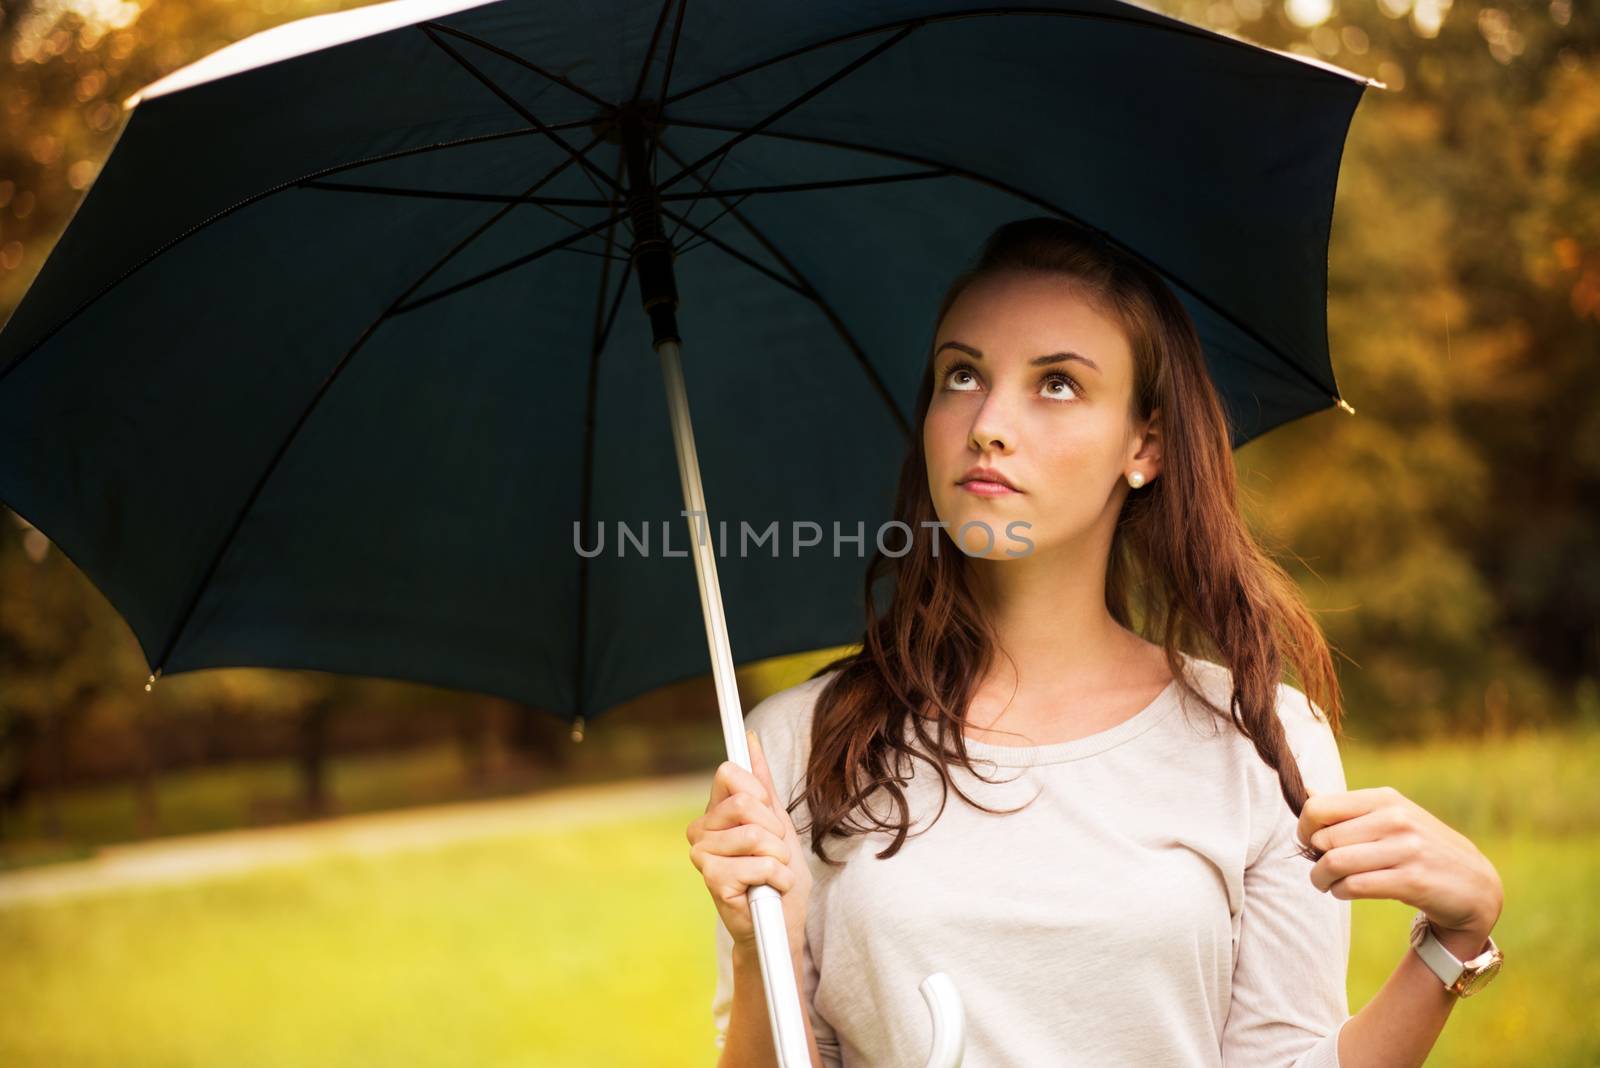 Young Woman With Umbrella by MilanMarkovic78